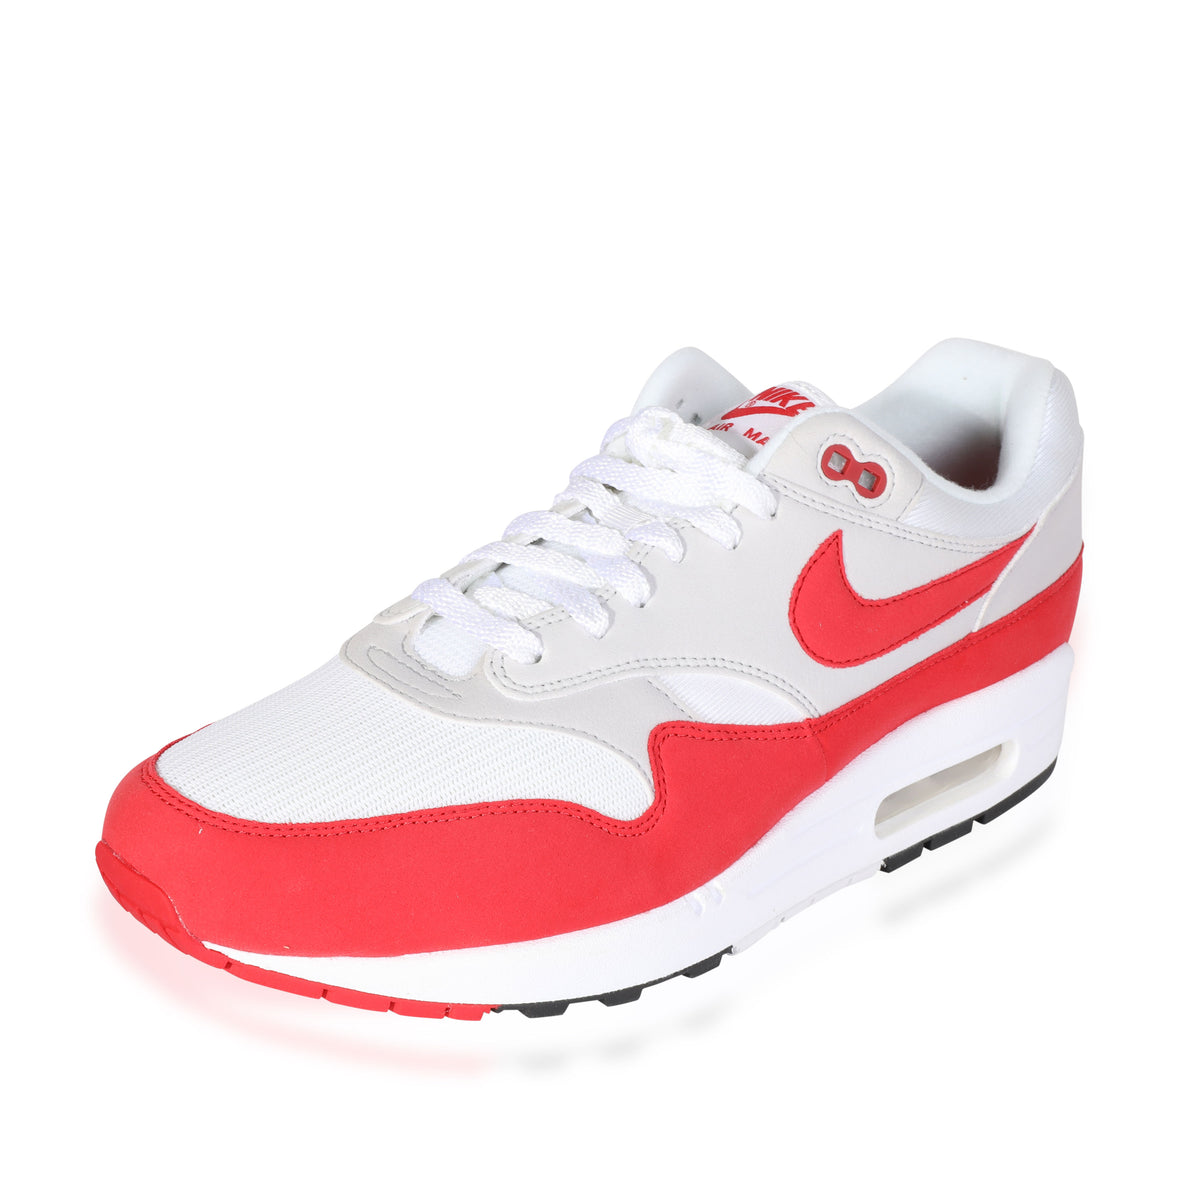 Air Max 1 OG 'Anniversary' 2017 Re-Release (11 US)